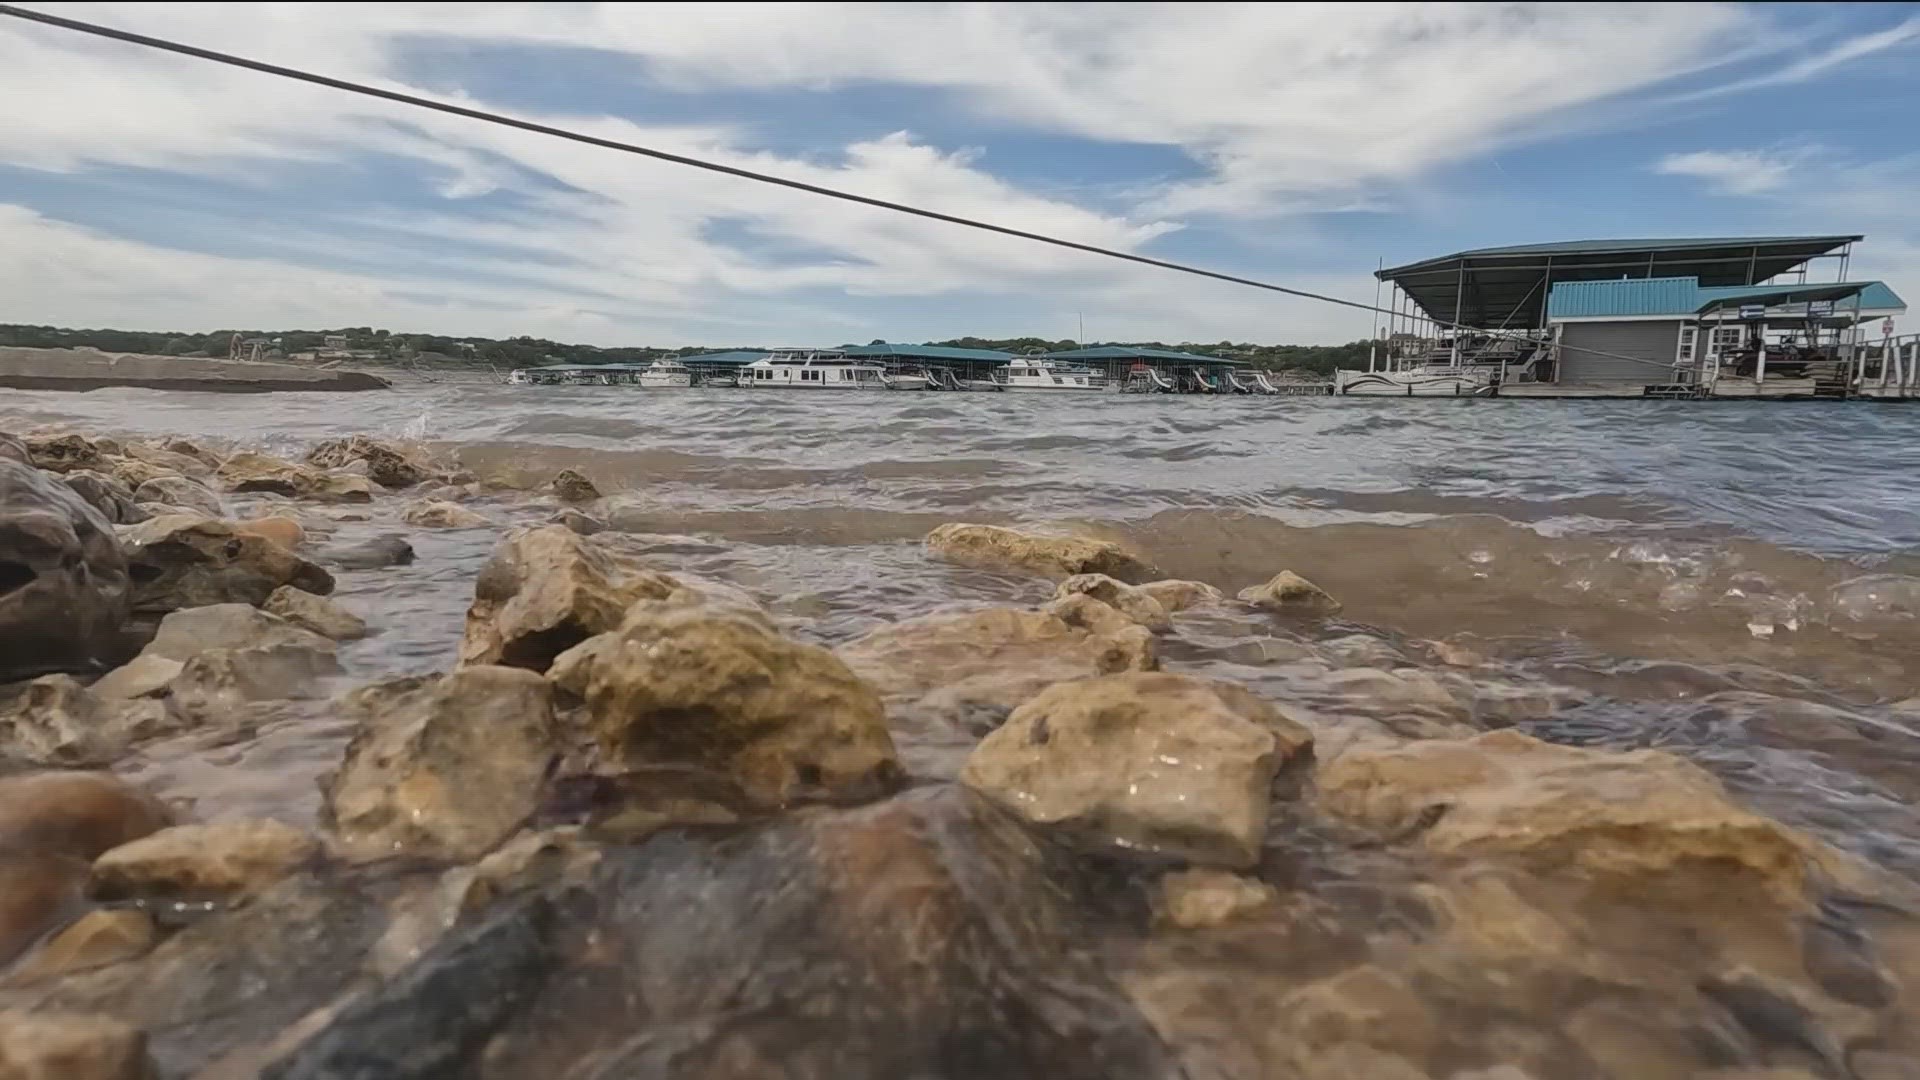 Some boat captains on Lake Travis say low water is hurting their business.